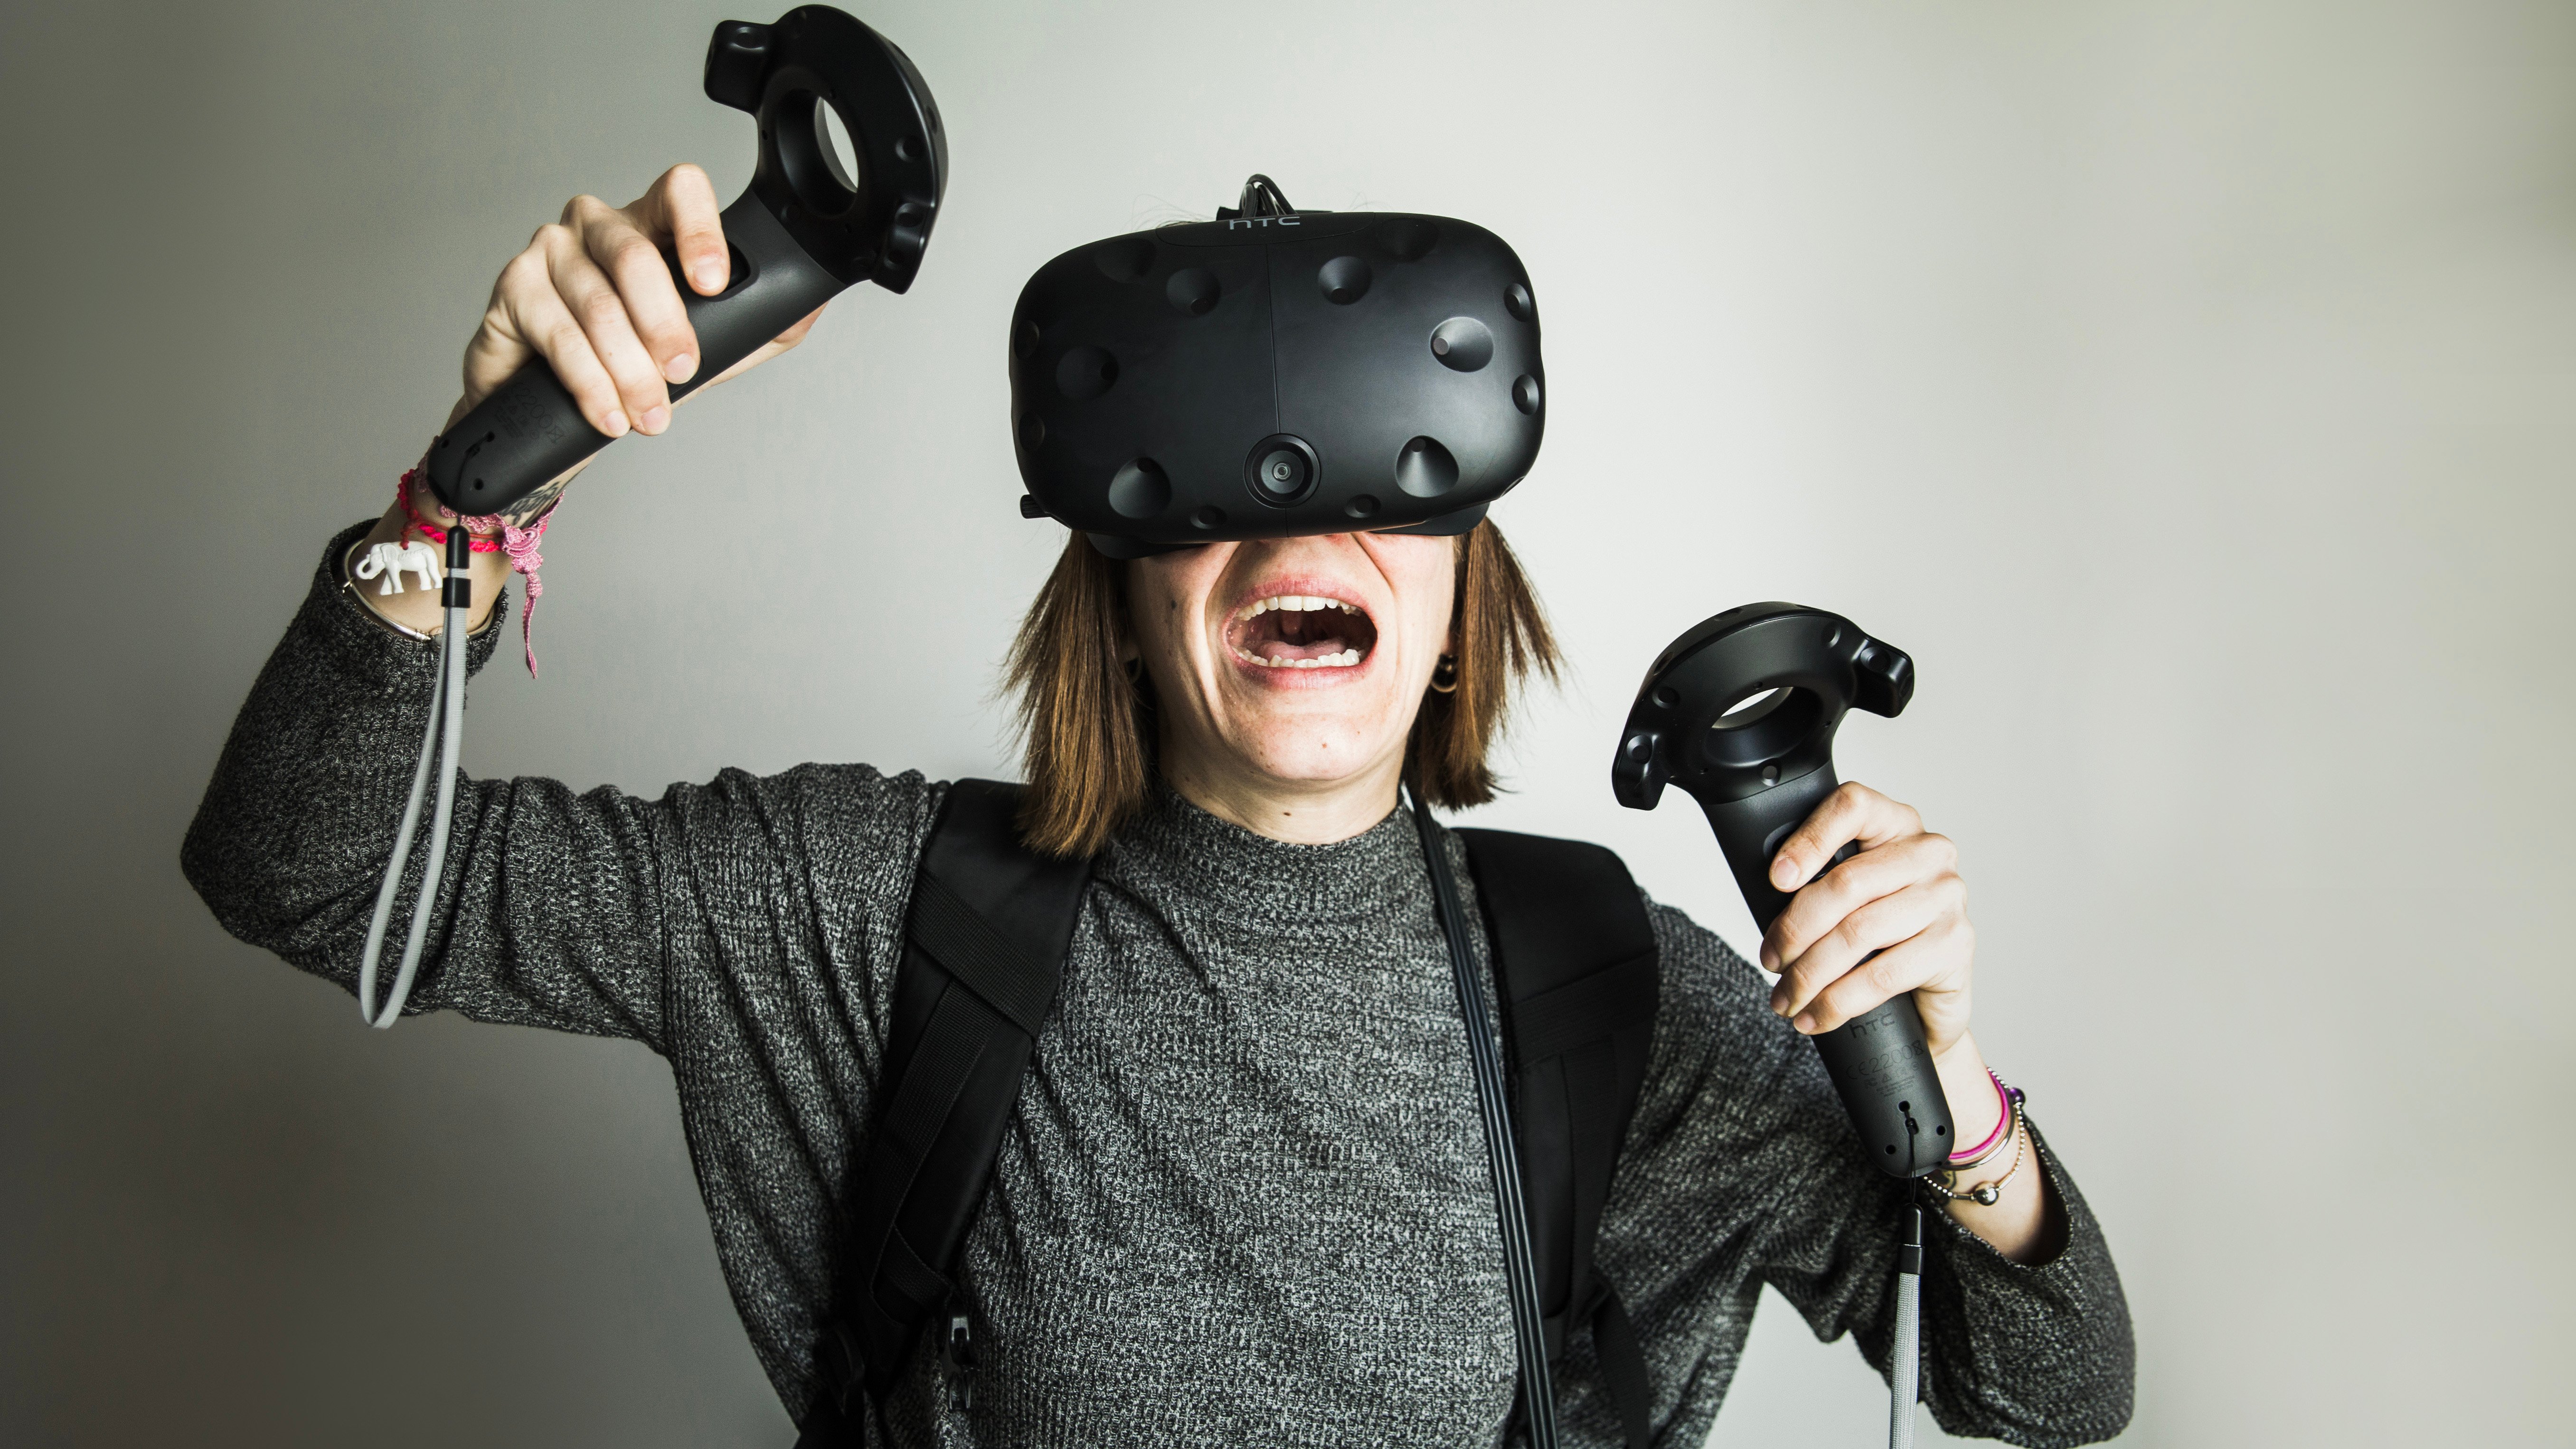 AndroidPIT htc vive hands on 3586 Virtual Reality Explained: HTC Vive